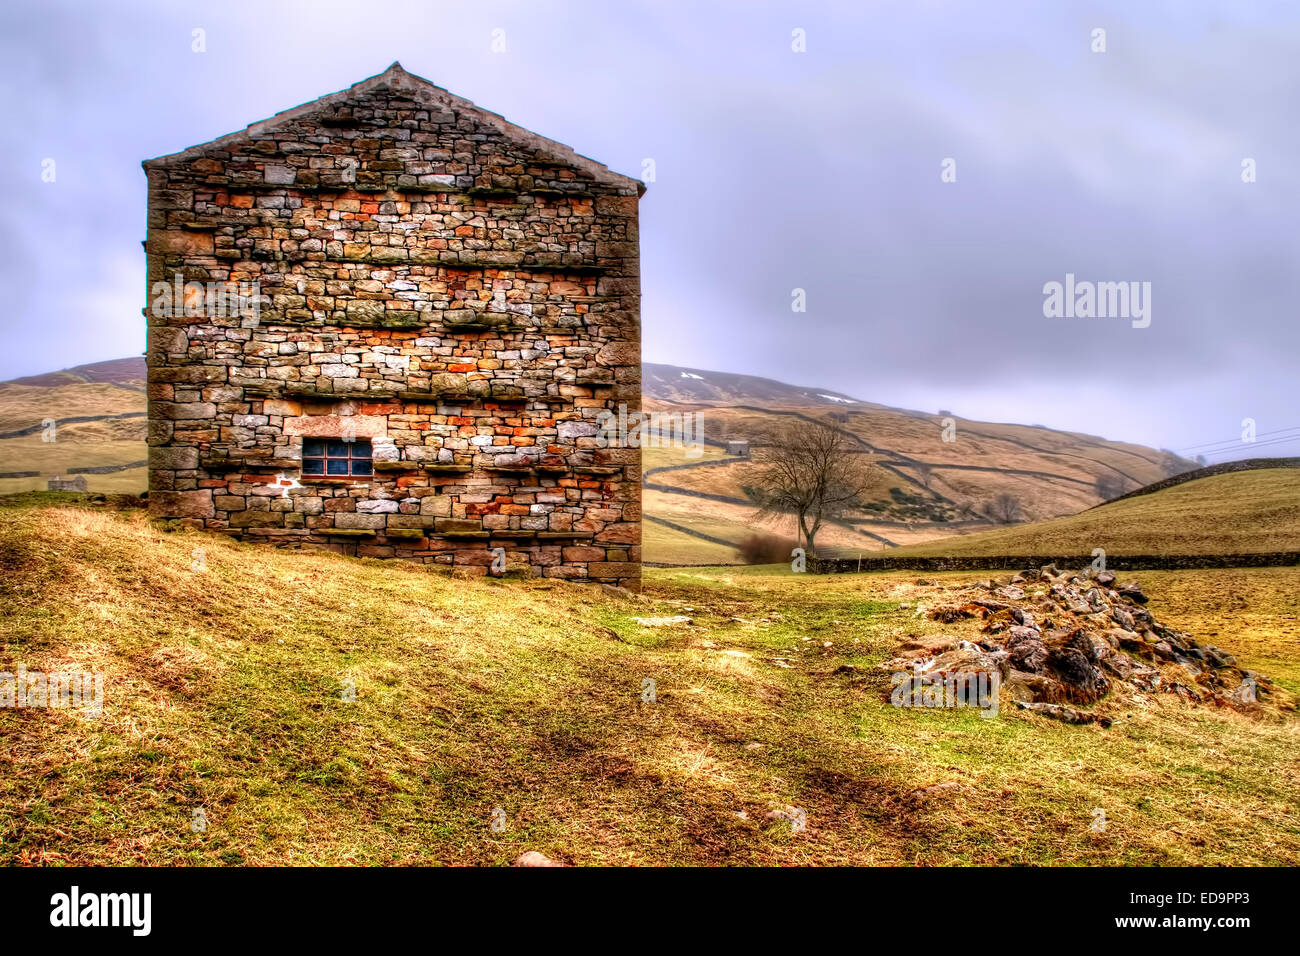 An all too familiar scene in Swaledale in the Yorkshire Dales National Park, and that being the barns. Image taken at Keld. Stock Photo